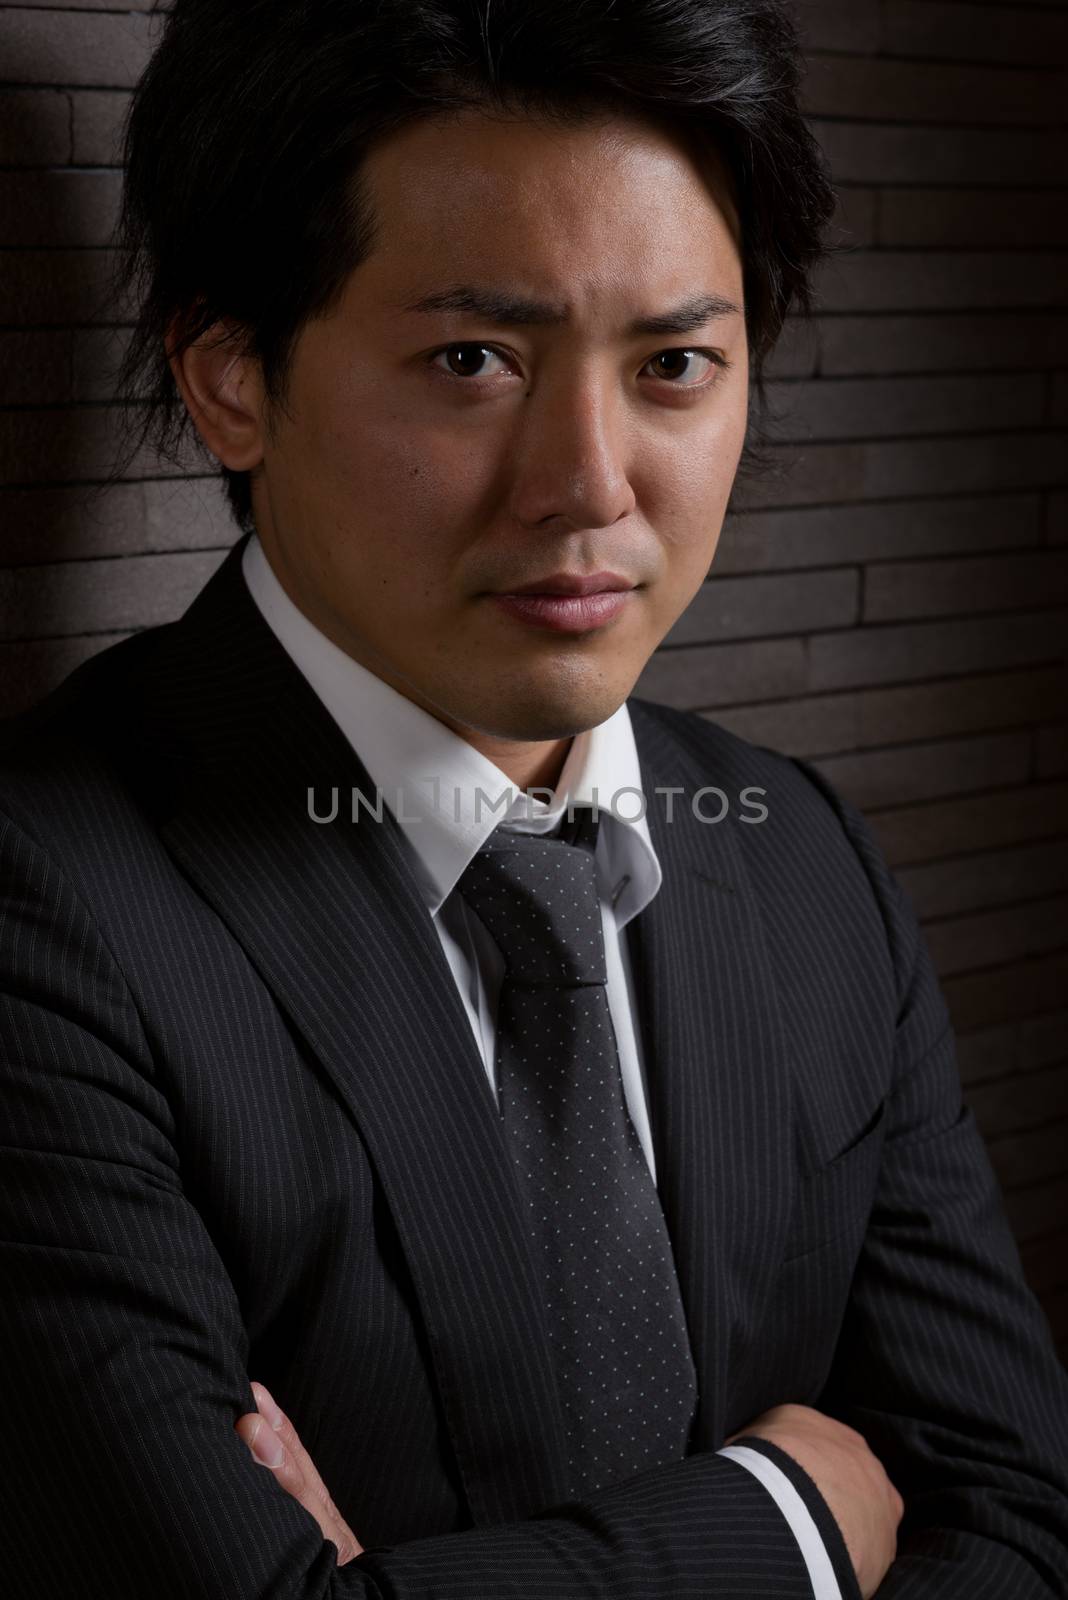 Dark and Serious Asian Male Portrait by justtscott